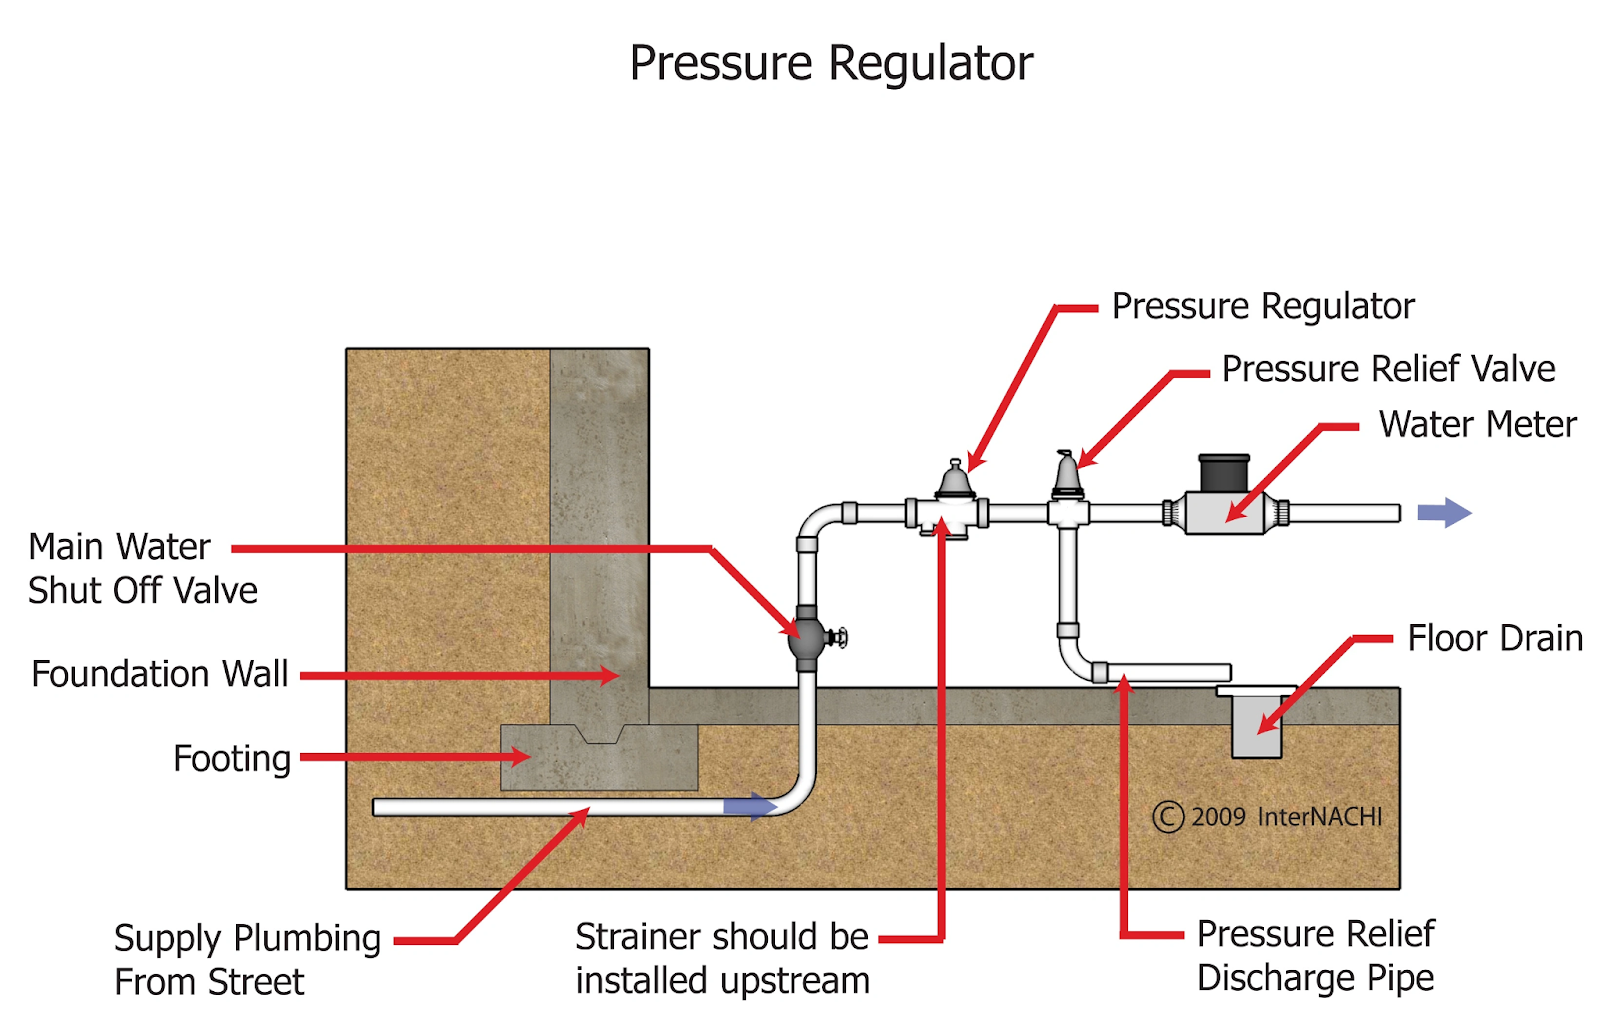 How to Troubleshoot Residential Water Pressure Regulator Problems